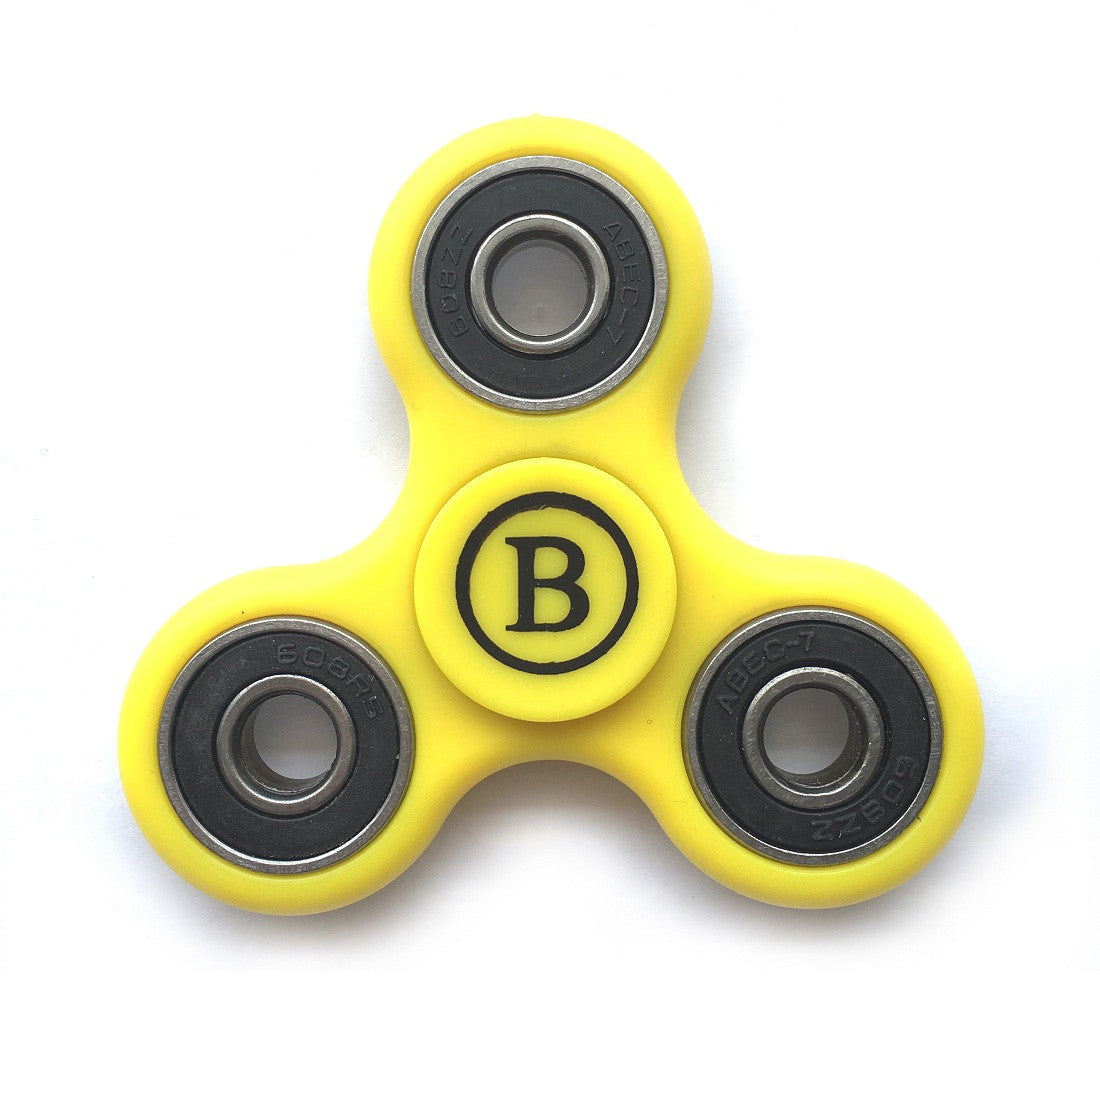 Fidget Hand Spinner High Speed Steel Bearing, Adhd Focus Anxiety Relief Toy - Yellow